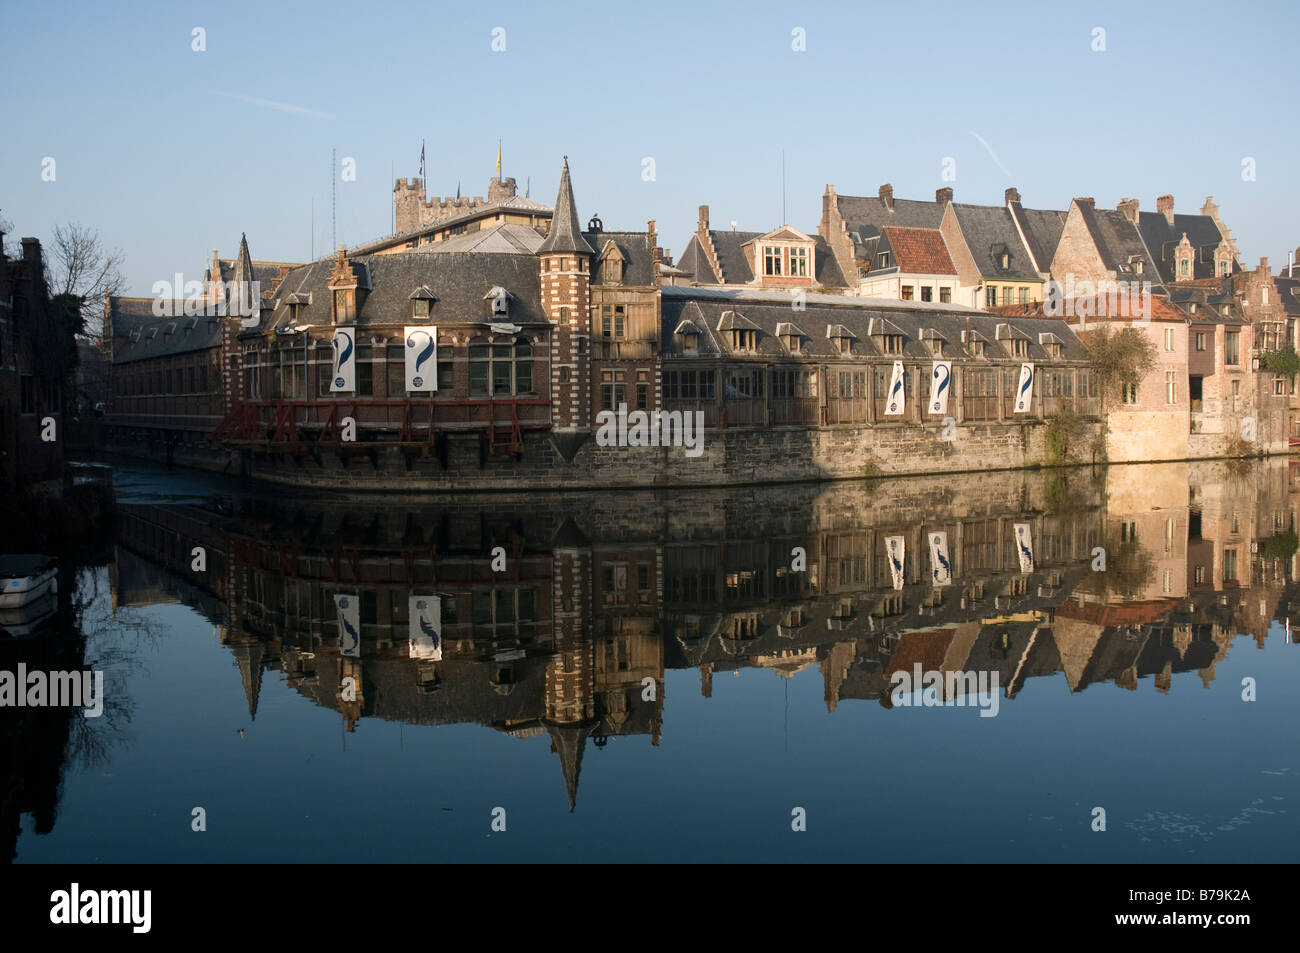 medieval architecture of Belgian city of Ghent reflected in the canal Stock Photo